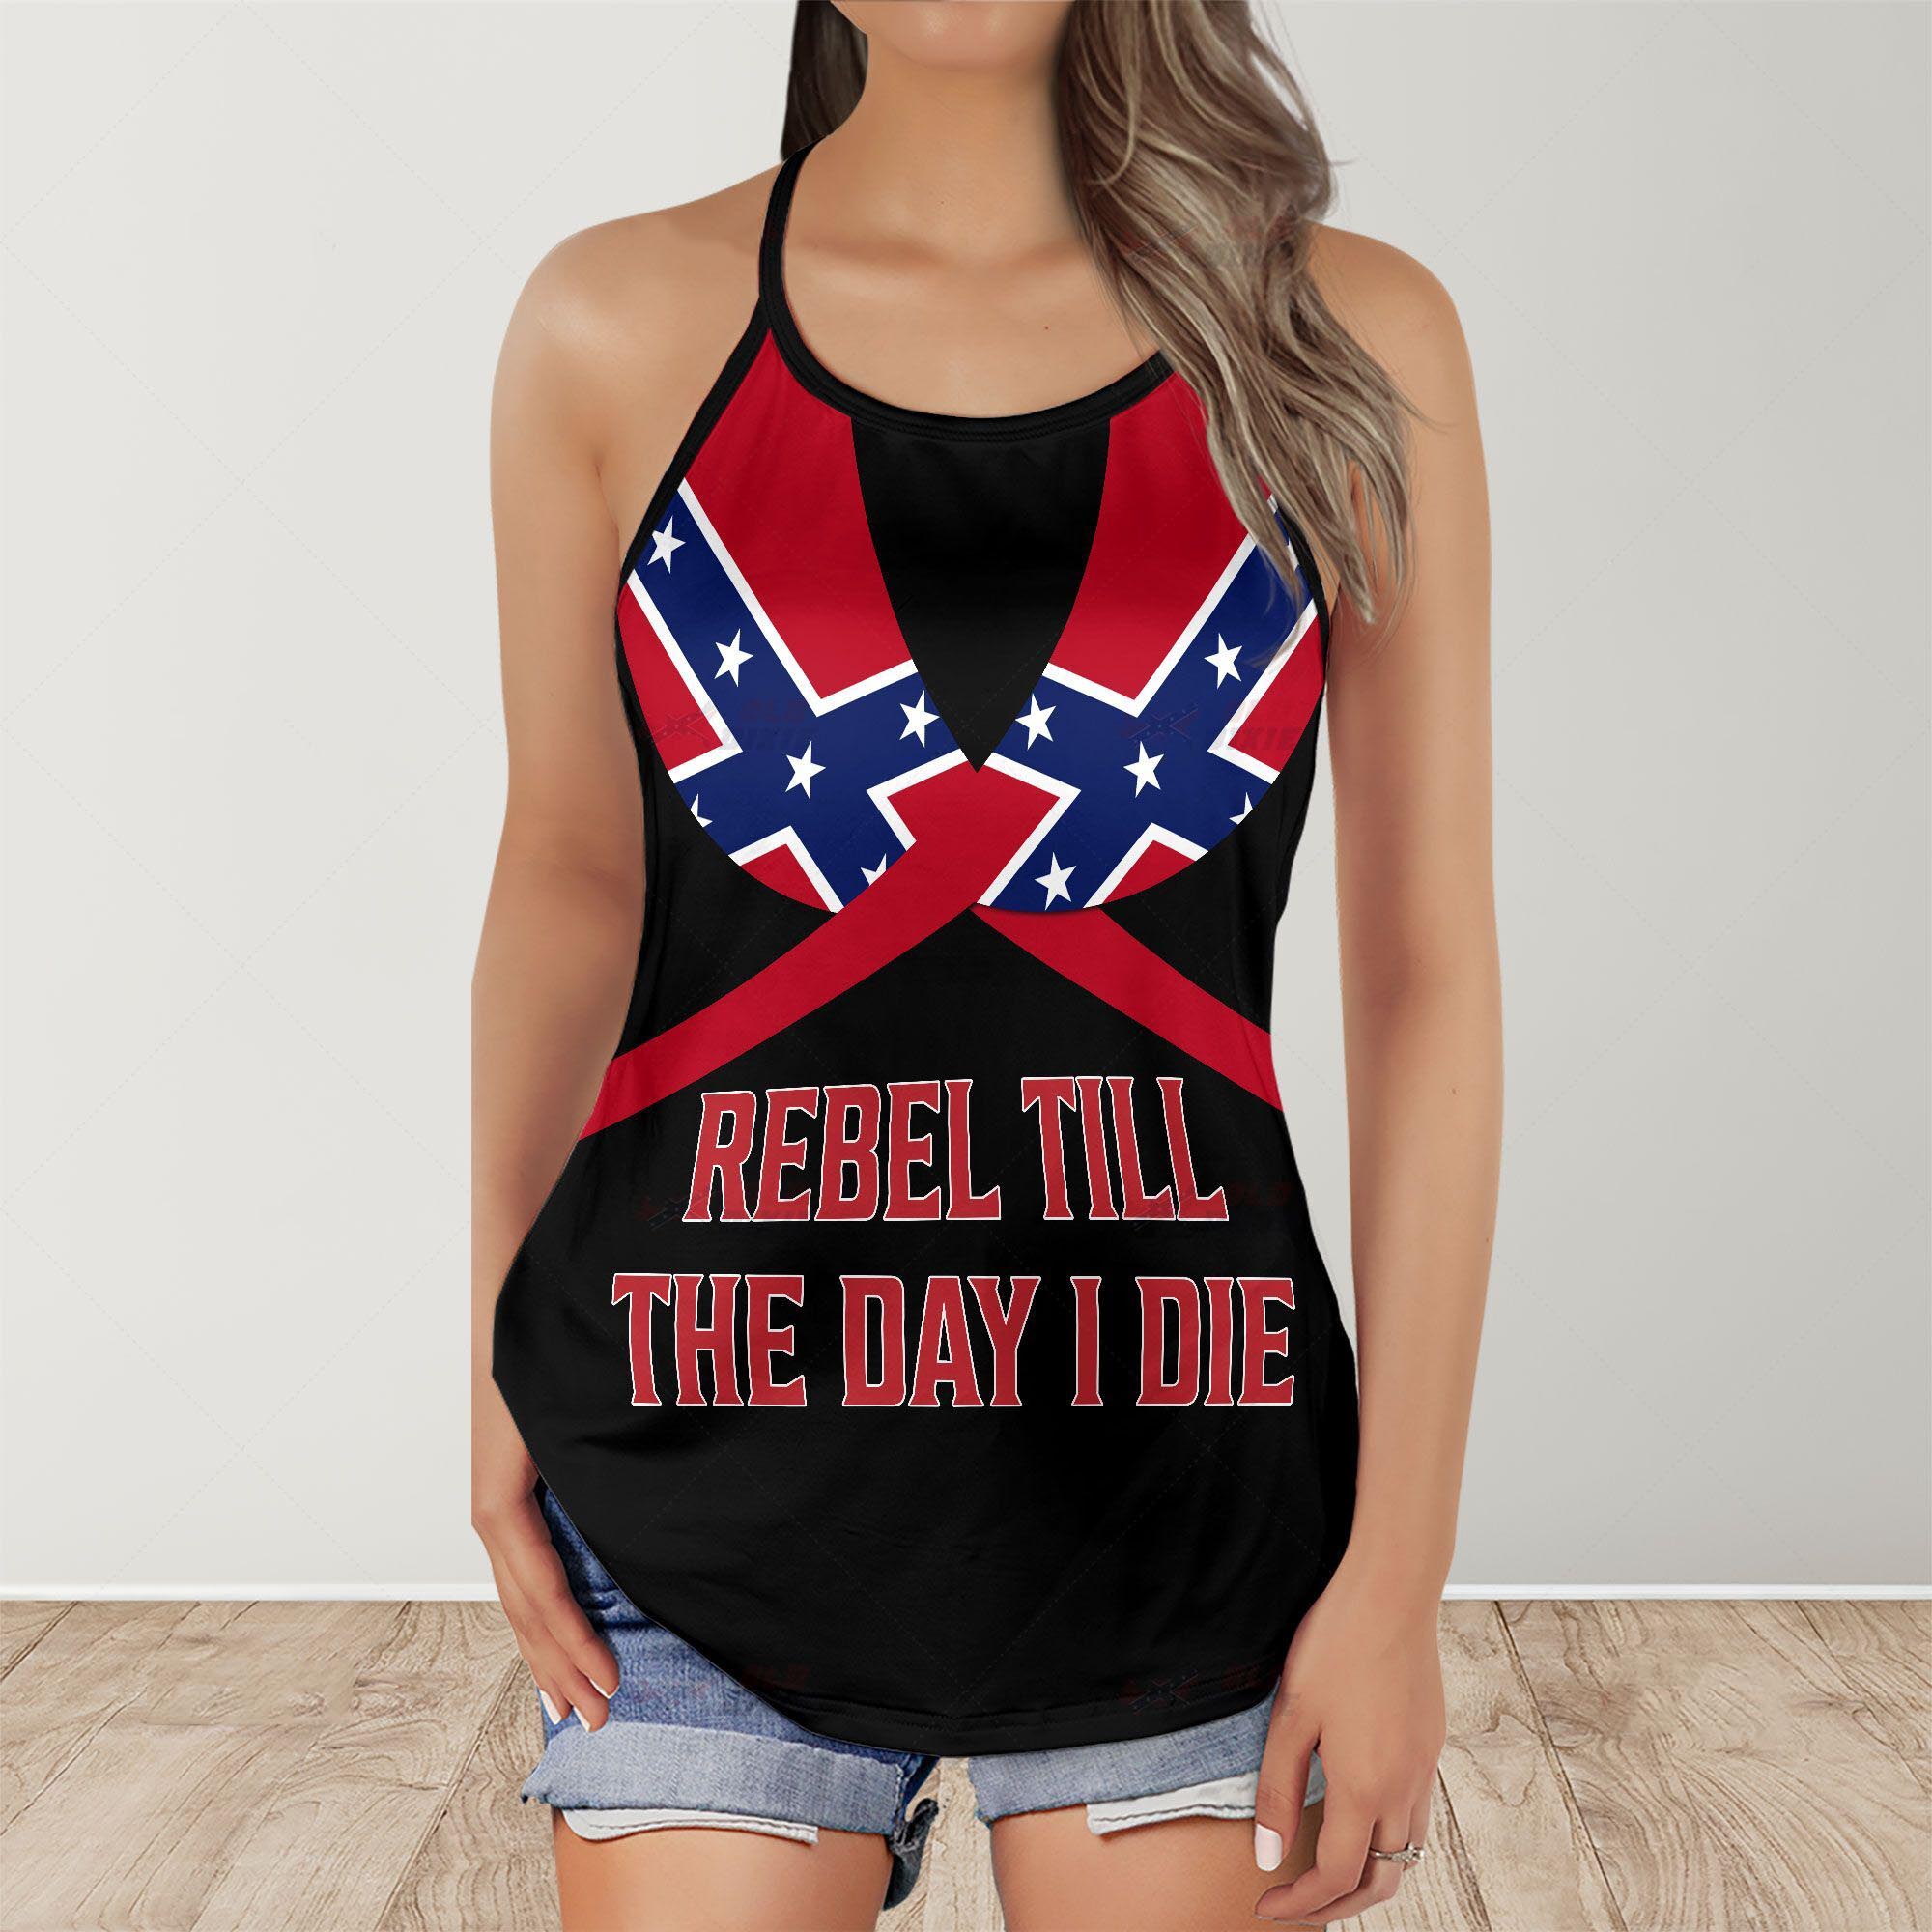 Southern Confederate Flag Skull Rebel till the day I die criss cross tank top - Picture 1